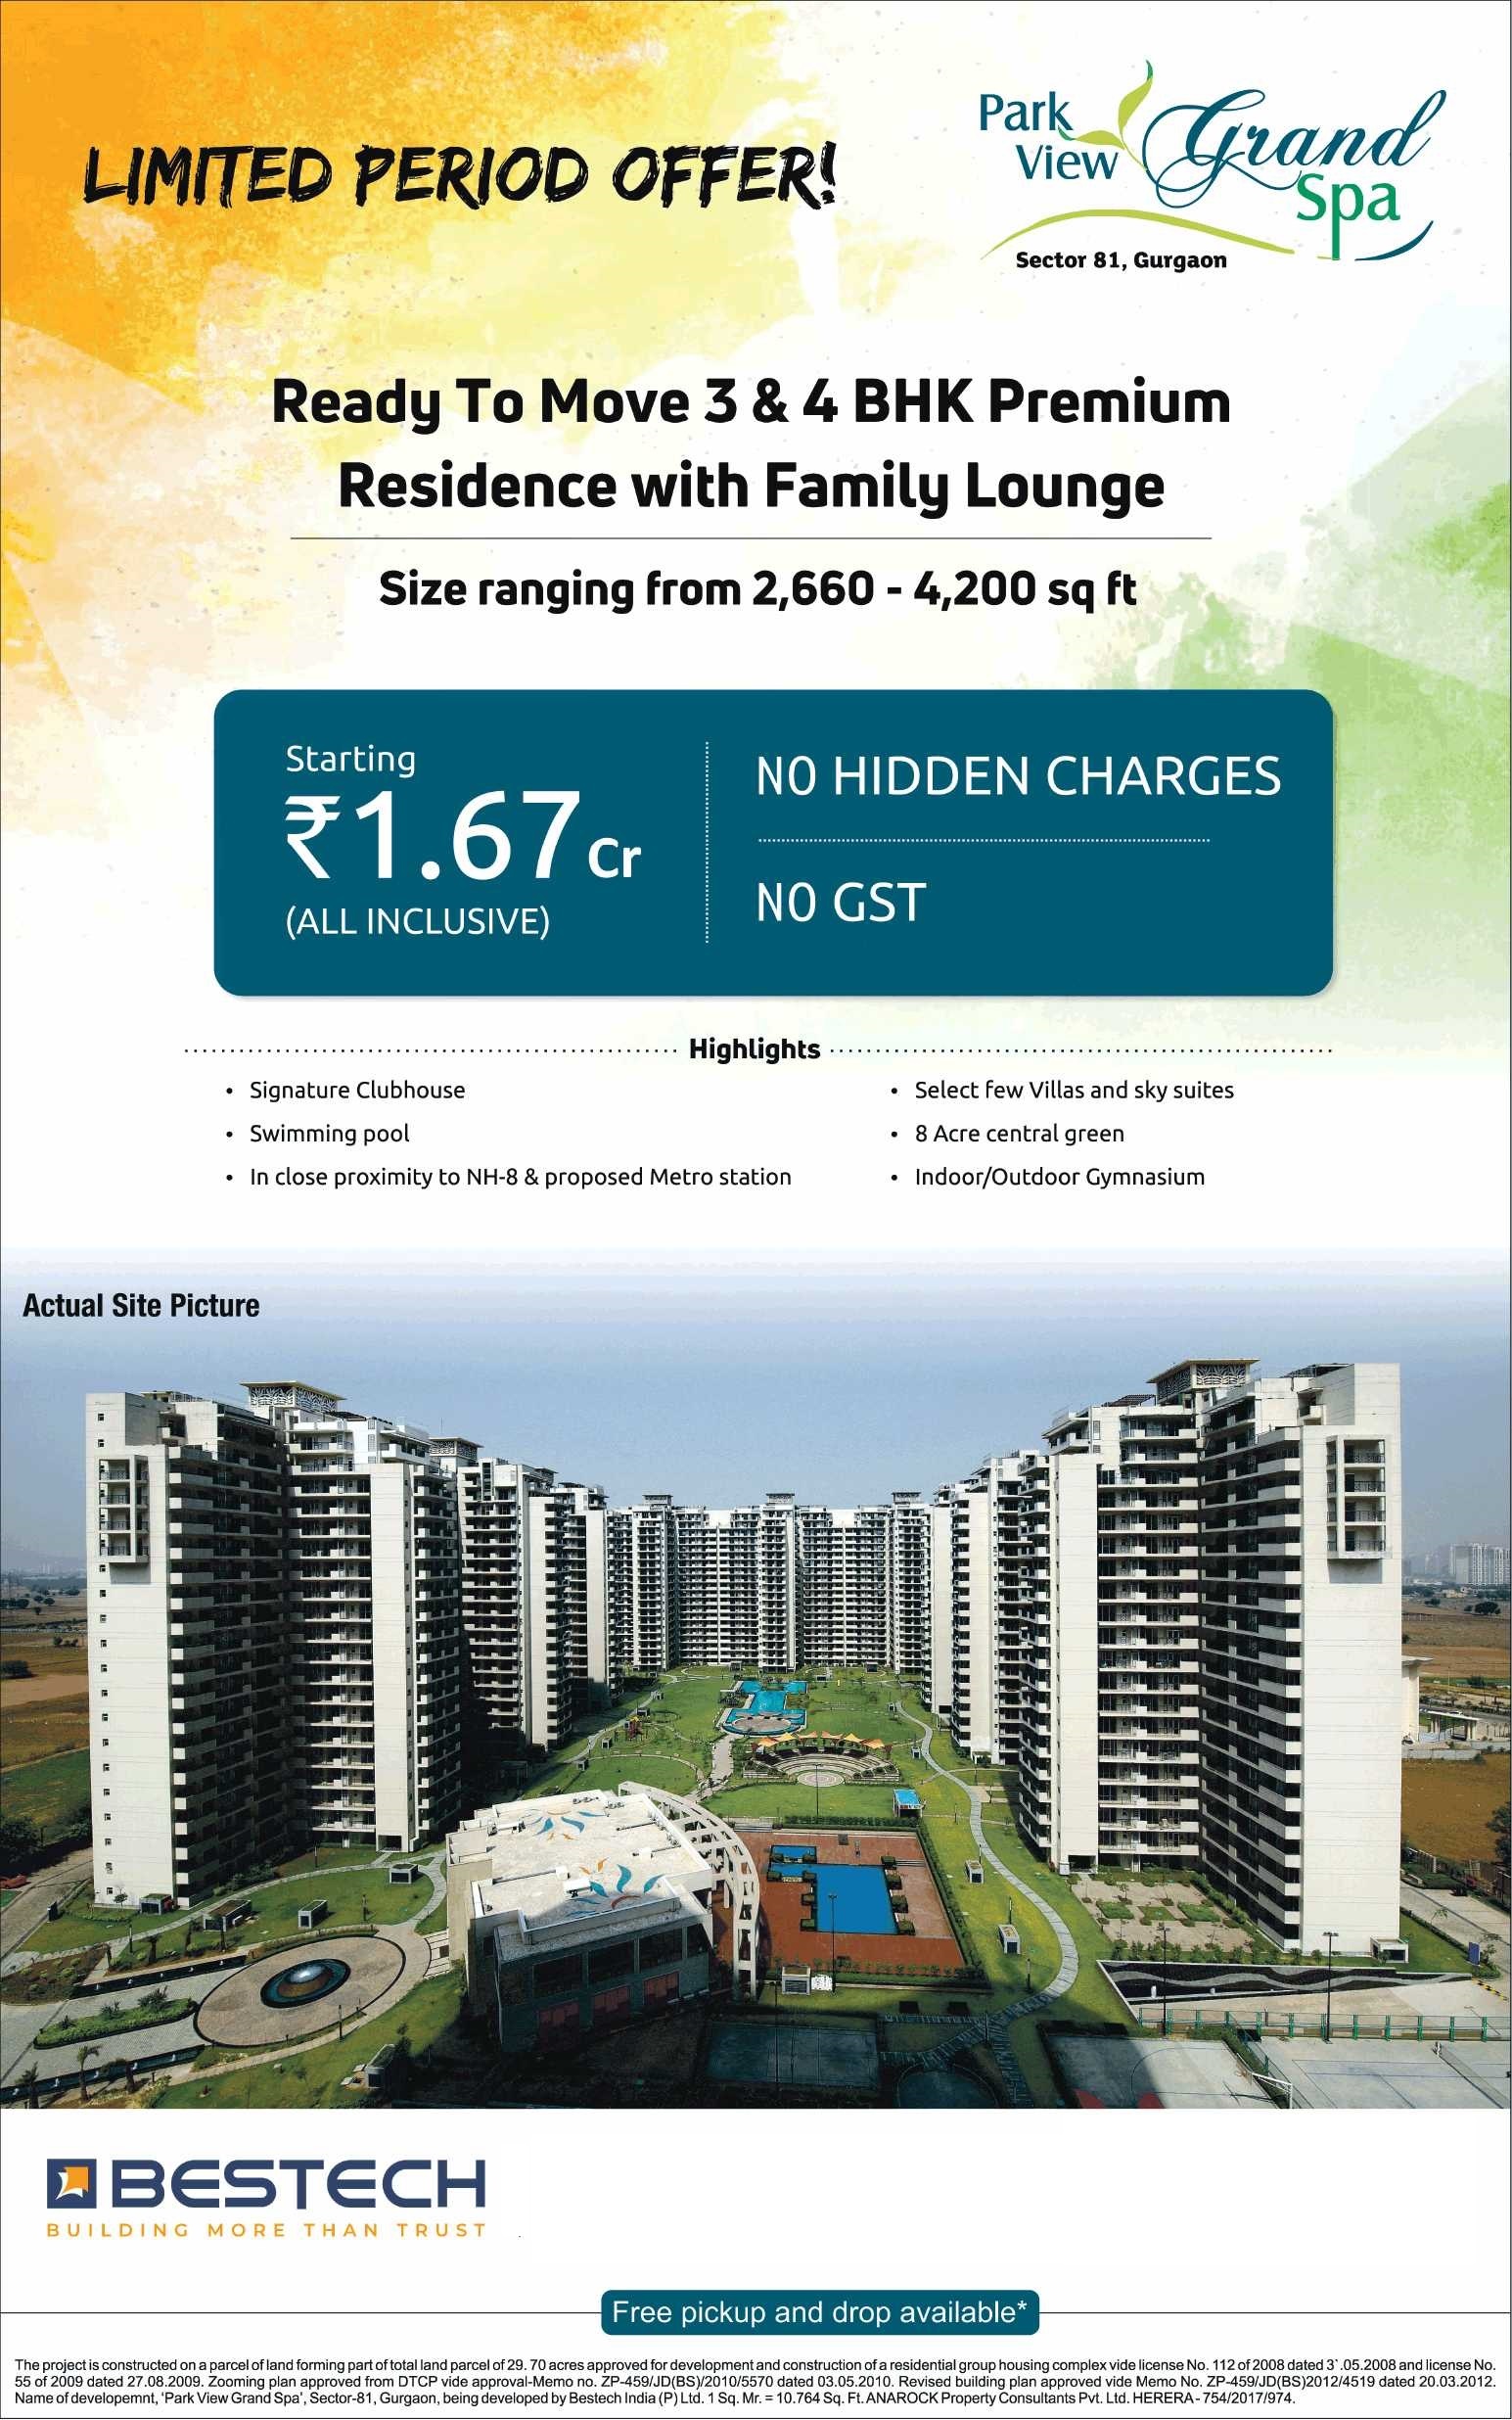 Ready to move 3 & 4 bhk premium residencies at Bestech Park View Grand Spa in Gurgaon Update